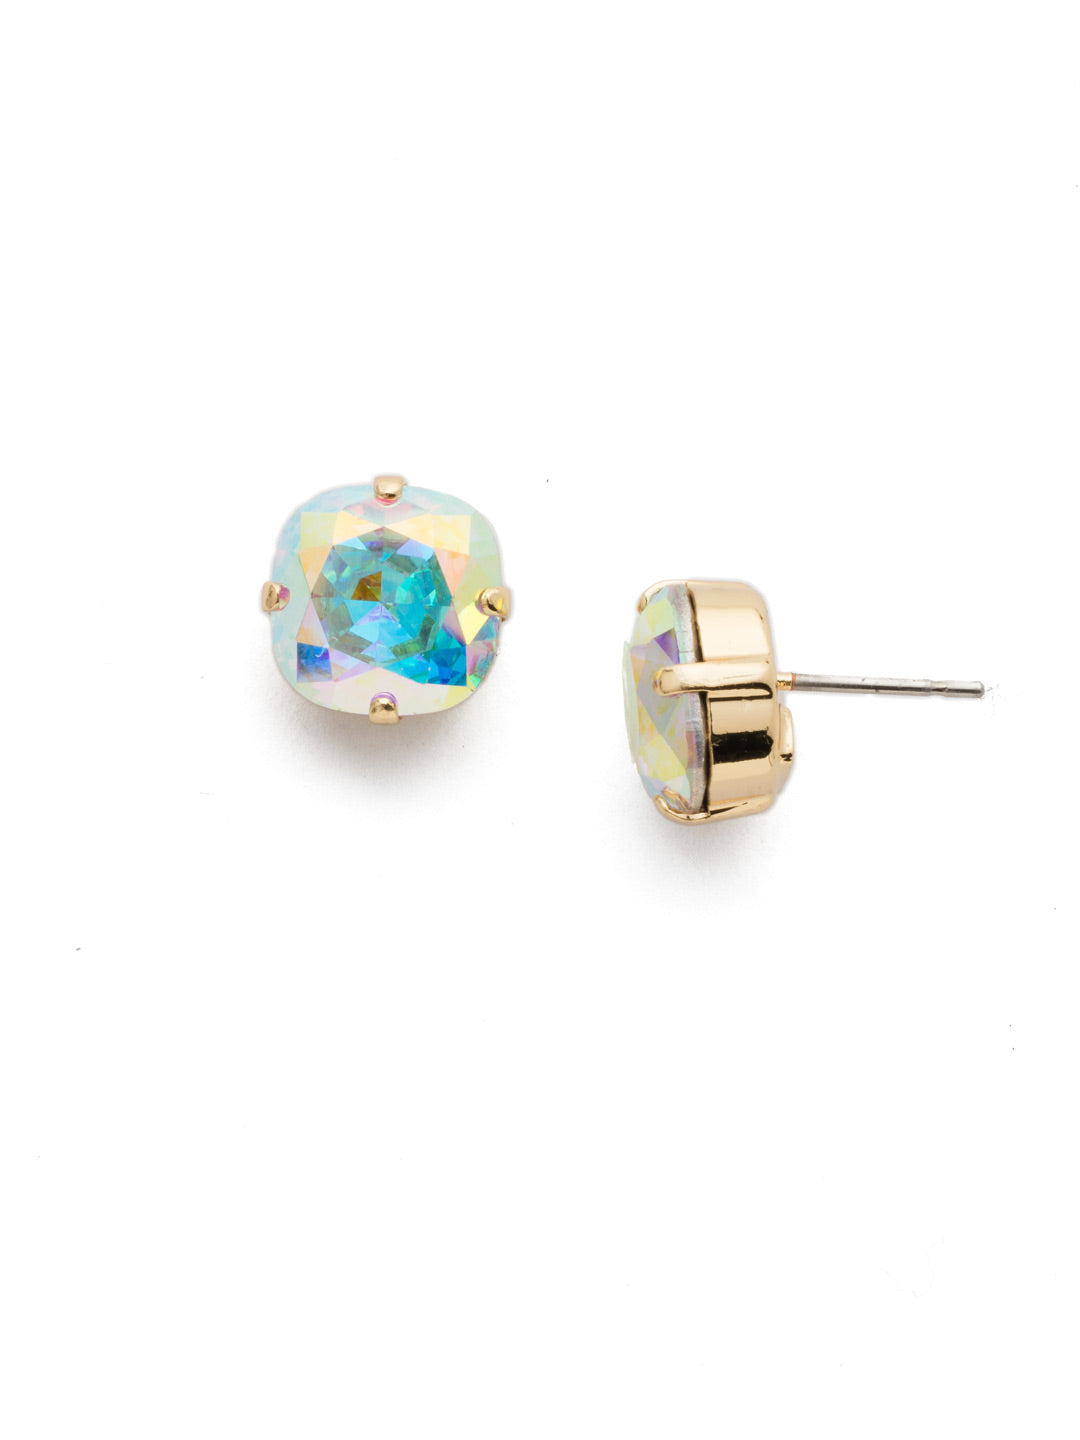 Halcyon Stud Earrings - EDH25BGCAB - A beautiful, luminous cushion-cut crystal in a classic four-pronged setting that's ideal for everyday wear. From Sorrelli's Crystal Aurora Borealis collection in our Bright Gold-tone finish.